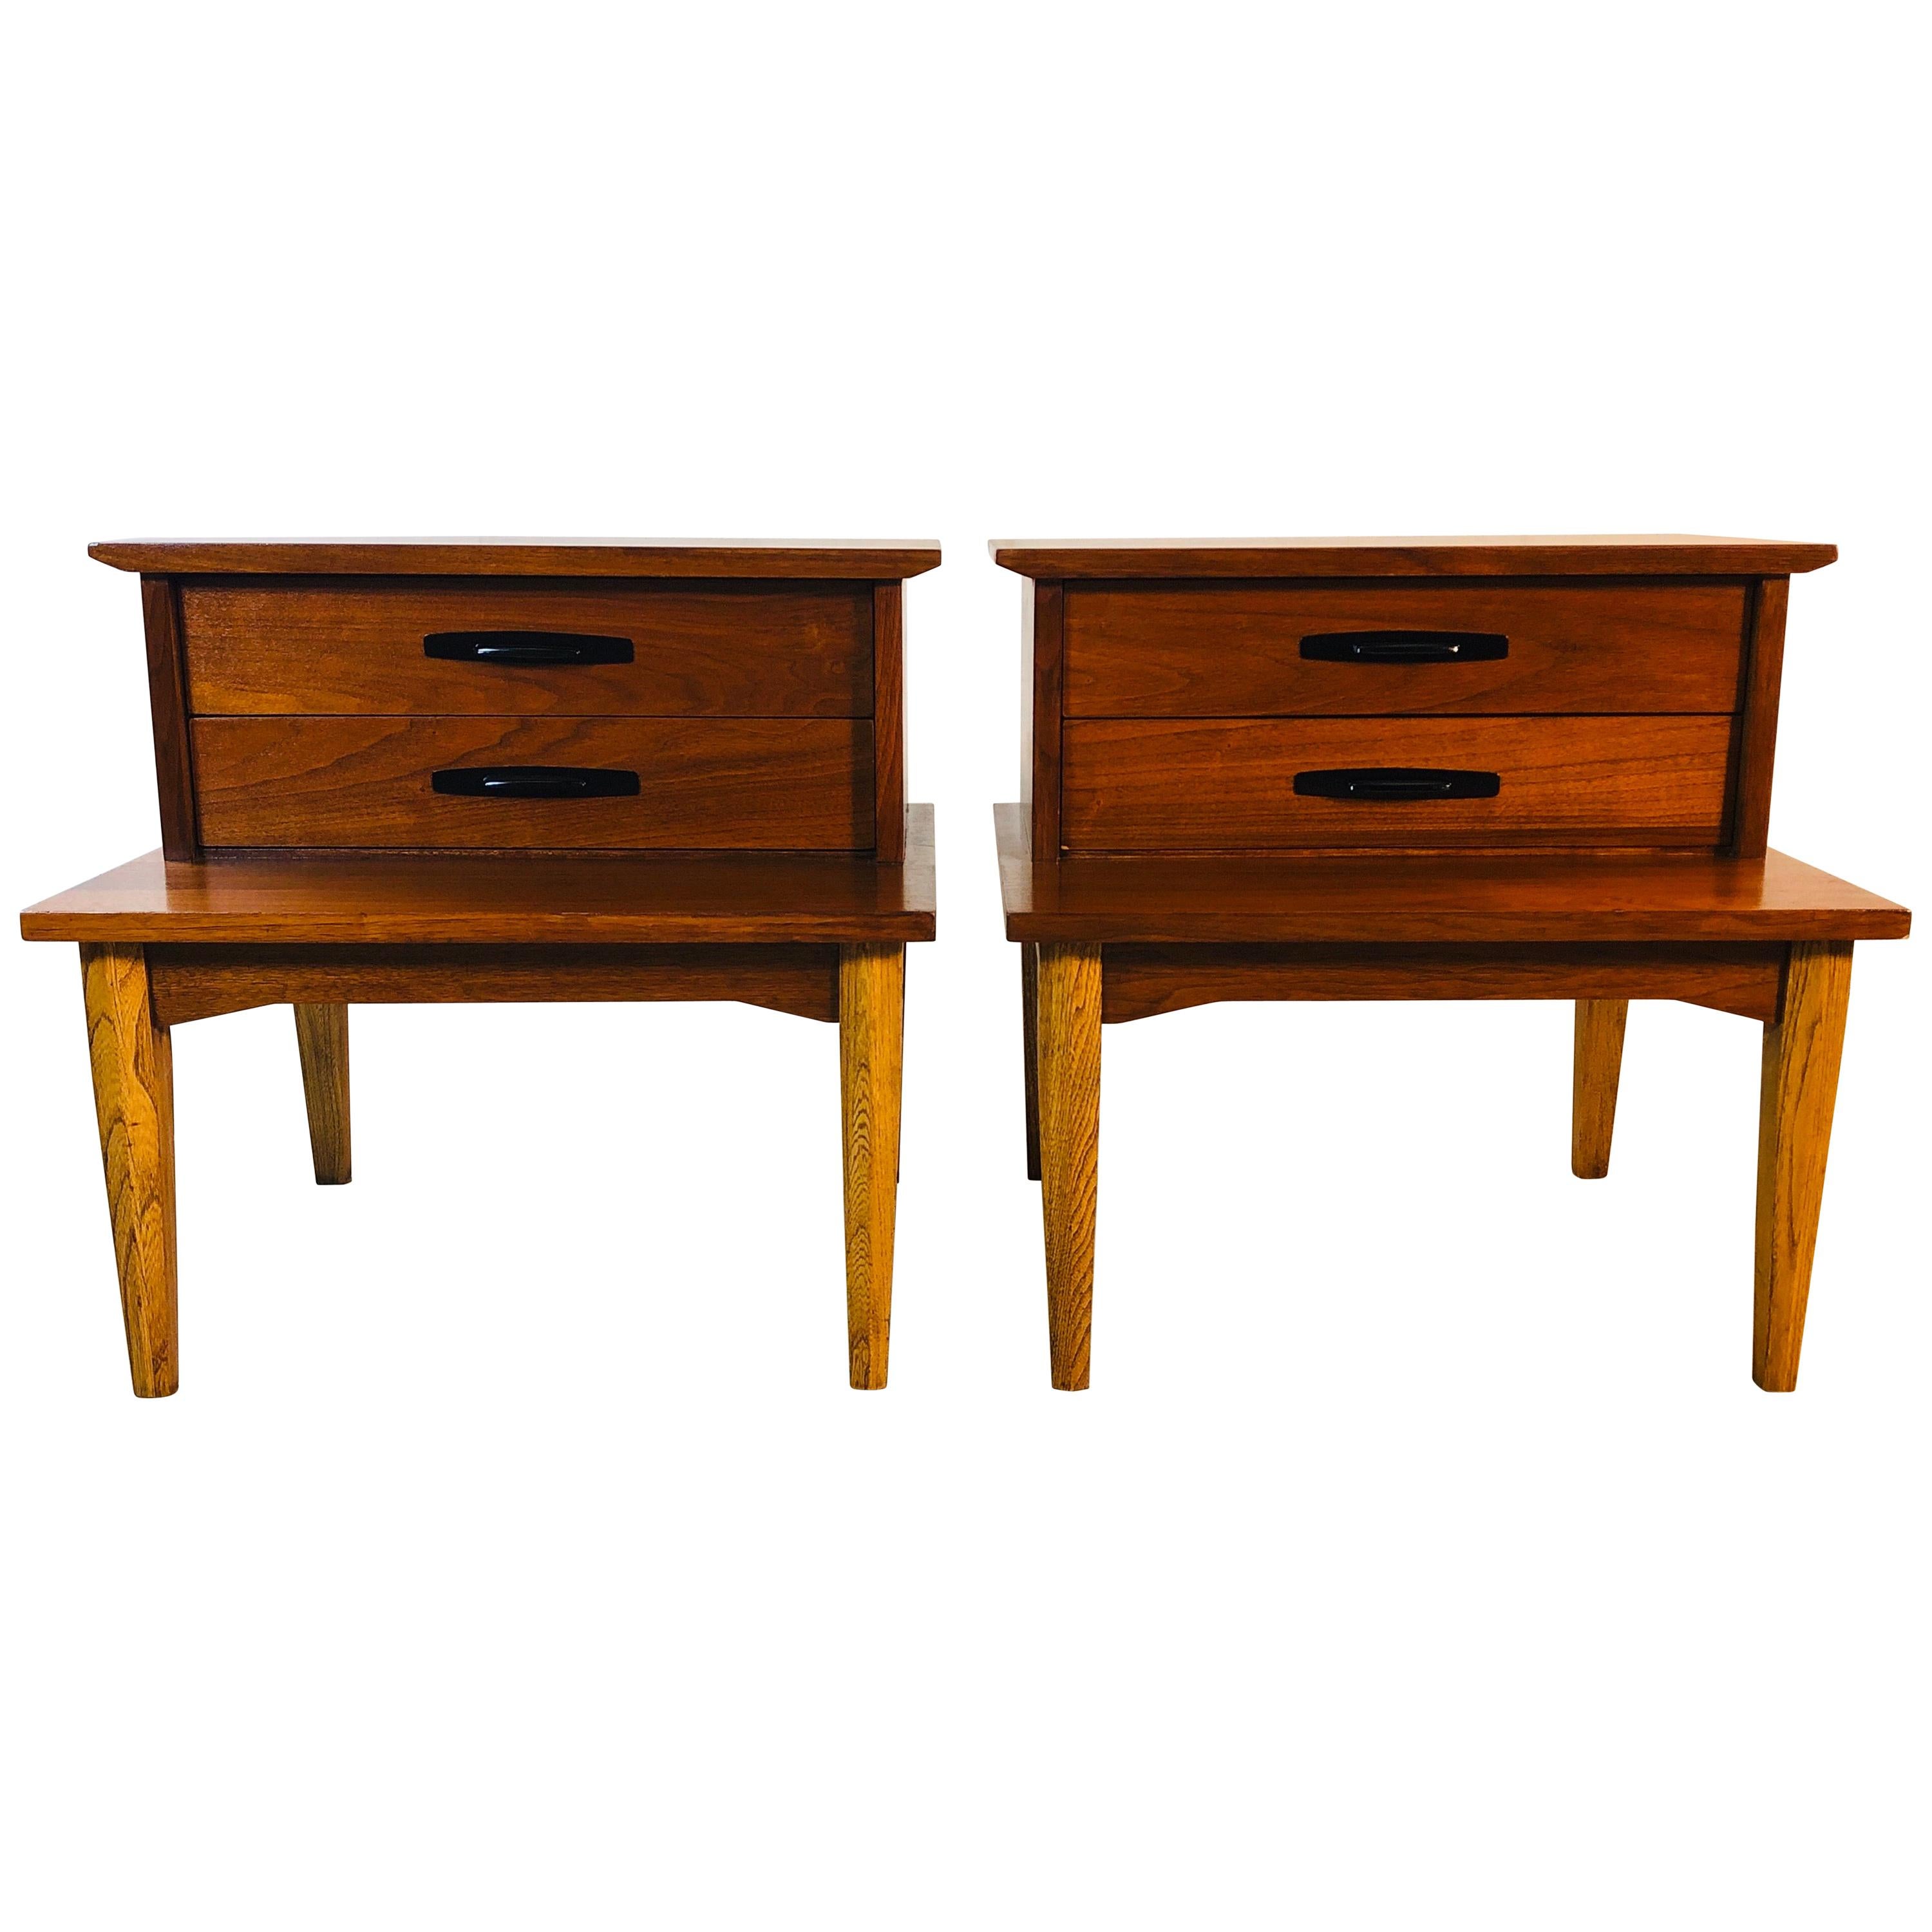 1960s Walnut Wood Step-Back Nightstands by Dixie Furniture Co, Pair For Sale